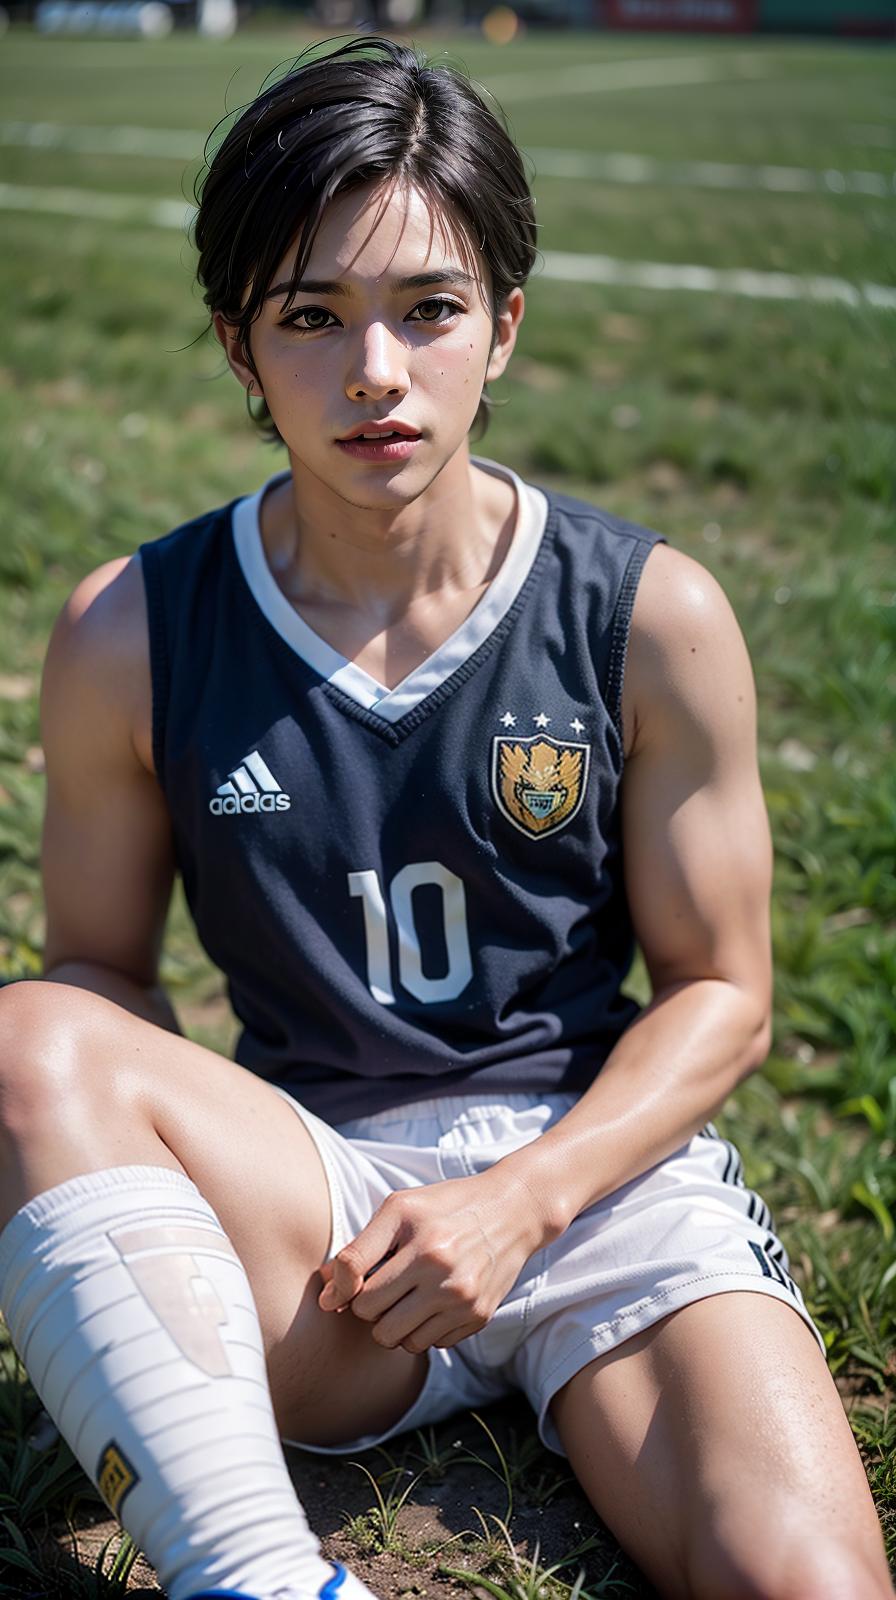  ultra high res, (photorealistic:1.4), raw photo, (realistic face), realistic eyes, (realistic skin), <lora:XXMix9_v20LoRa:0.8>, (handsome:1.1), (male:2), (asian:1.6), (soccer players:1.2), (short hair:1.2), (pompadour:1.3), (white briefs:1.3), (sleeveless:1.2), spike shoes, (soccer shin guards:1.3), young, sitting posture, (spread legs:1.1), real skin, (sexy posing:1.3), hot guy, (muscular:1.3), (naked:1.1), (bulge:1.1), trained calves, thigh, realistic, lifelike, high quality, photos taken with a single-lens reflex camera, (looking at the camera:1.2)